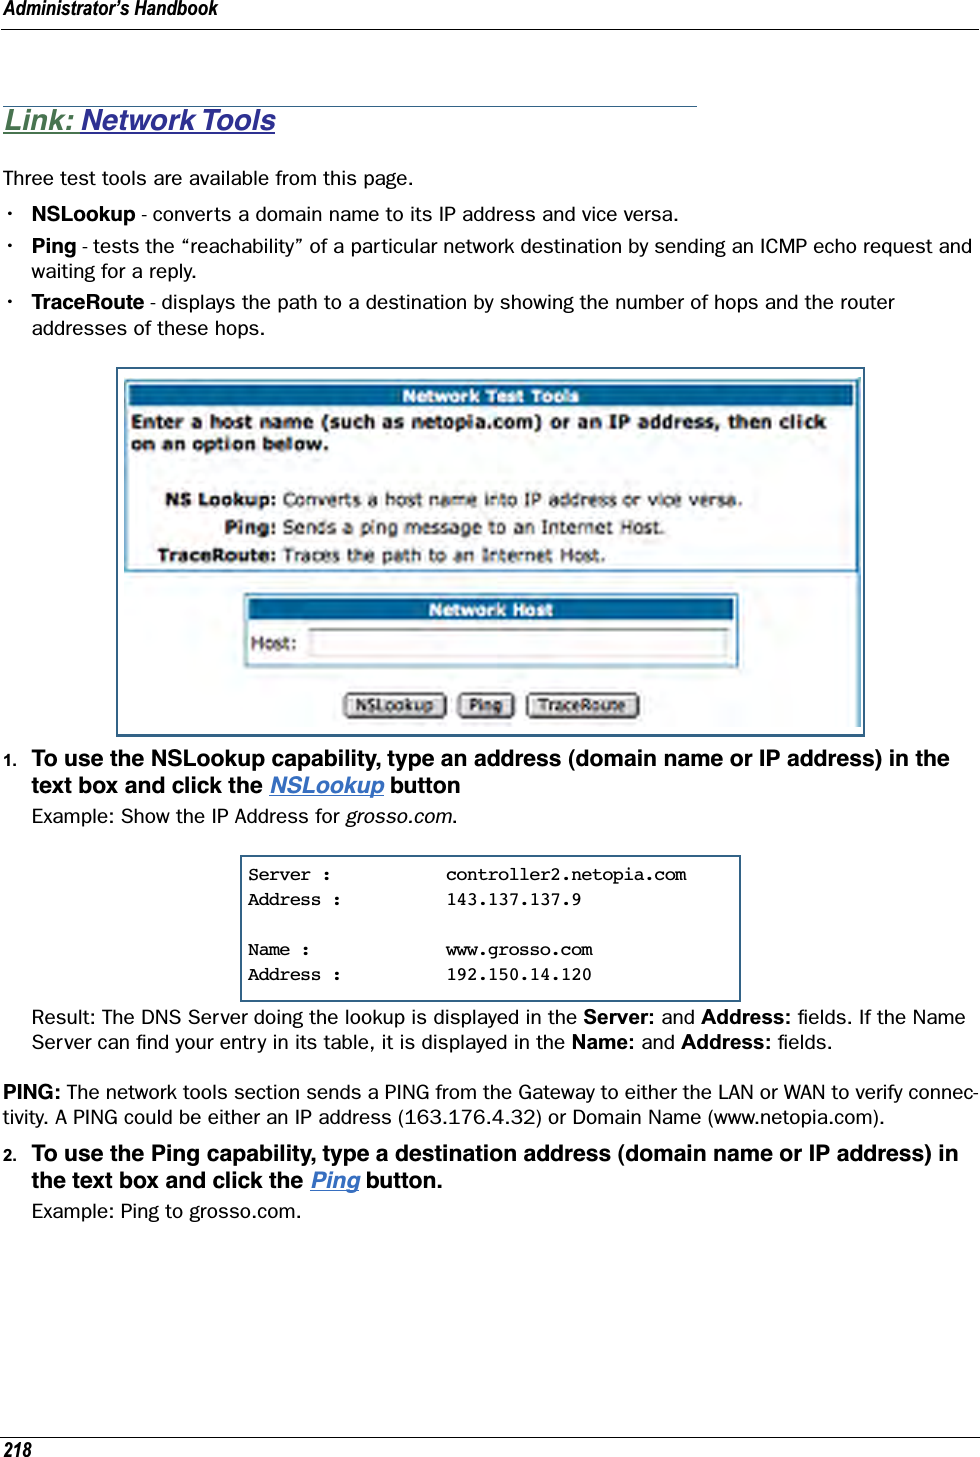 Administrator’s Handbook218Link: Network ToolsThree test tools are available from this page.•NSLookup - converts a domain name to its IP address and vice versa.•Ping - tests the “reachability” of a particular network destination by sending an ICMP echo request and waiting for a reply.•TraceRoute - displays the path to a destination by showing the number of hops and the router addresses of these hops.1. To use the NSLookup capability, type an address (domain name or IP address) in the text box and click the NSLookup buttonExample: Show the IP Address for grosso.com. Result: The DNS Server doing the lookup is displayed in the Server: and Address: ﬁelds. If the Name Server can ﬁnd your entry in its table, it is displayed in the Name: and Address: ﬁelds.PING: The network tools section sends a PING from the Gateway to either the LAN or WAN to verify connec-tivity. A PING could be either an IP address (163.176.4.32) or Domain Name (www.netopia.com).2. To use the Ping capability, type a destination address (domain name or IP address) in the text box and click the Ping button.Example: Ping to grosso.com.Server :           controller2.netopia.comAddress :          143.137.137.9Name :             www.grosso.comAddress :          192.150.14.120